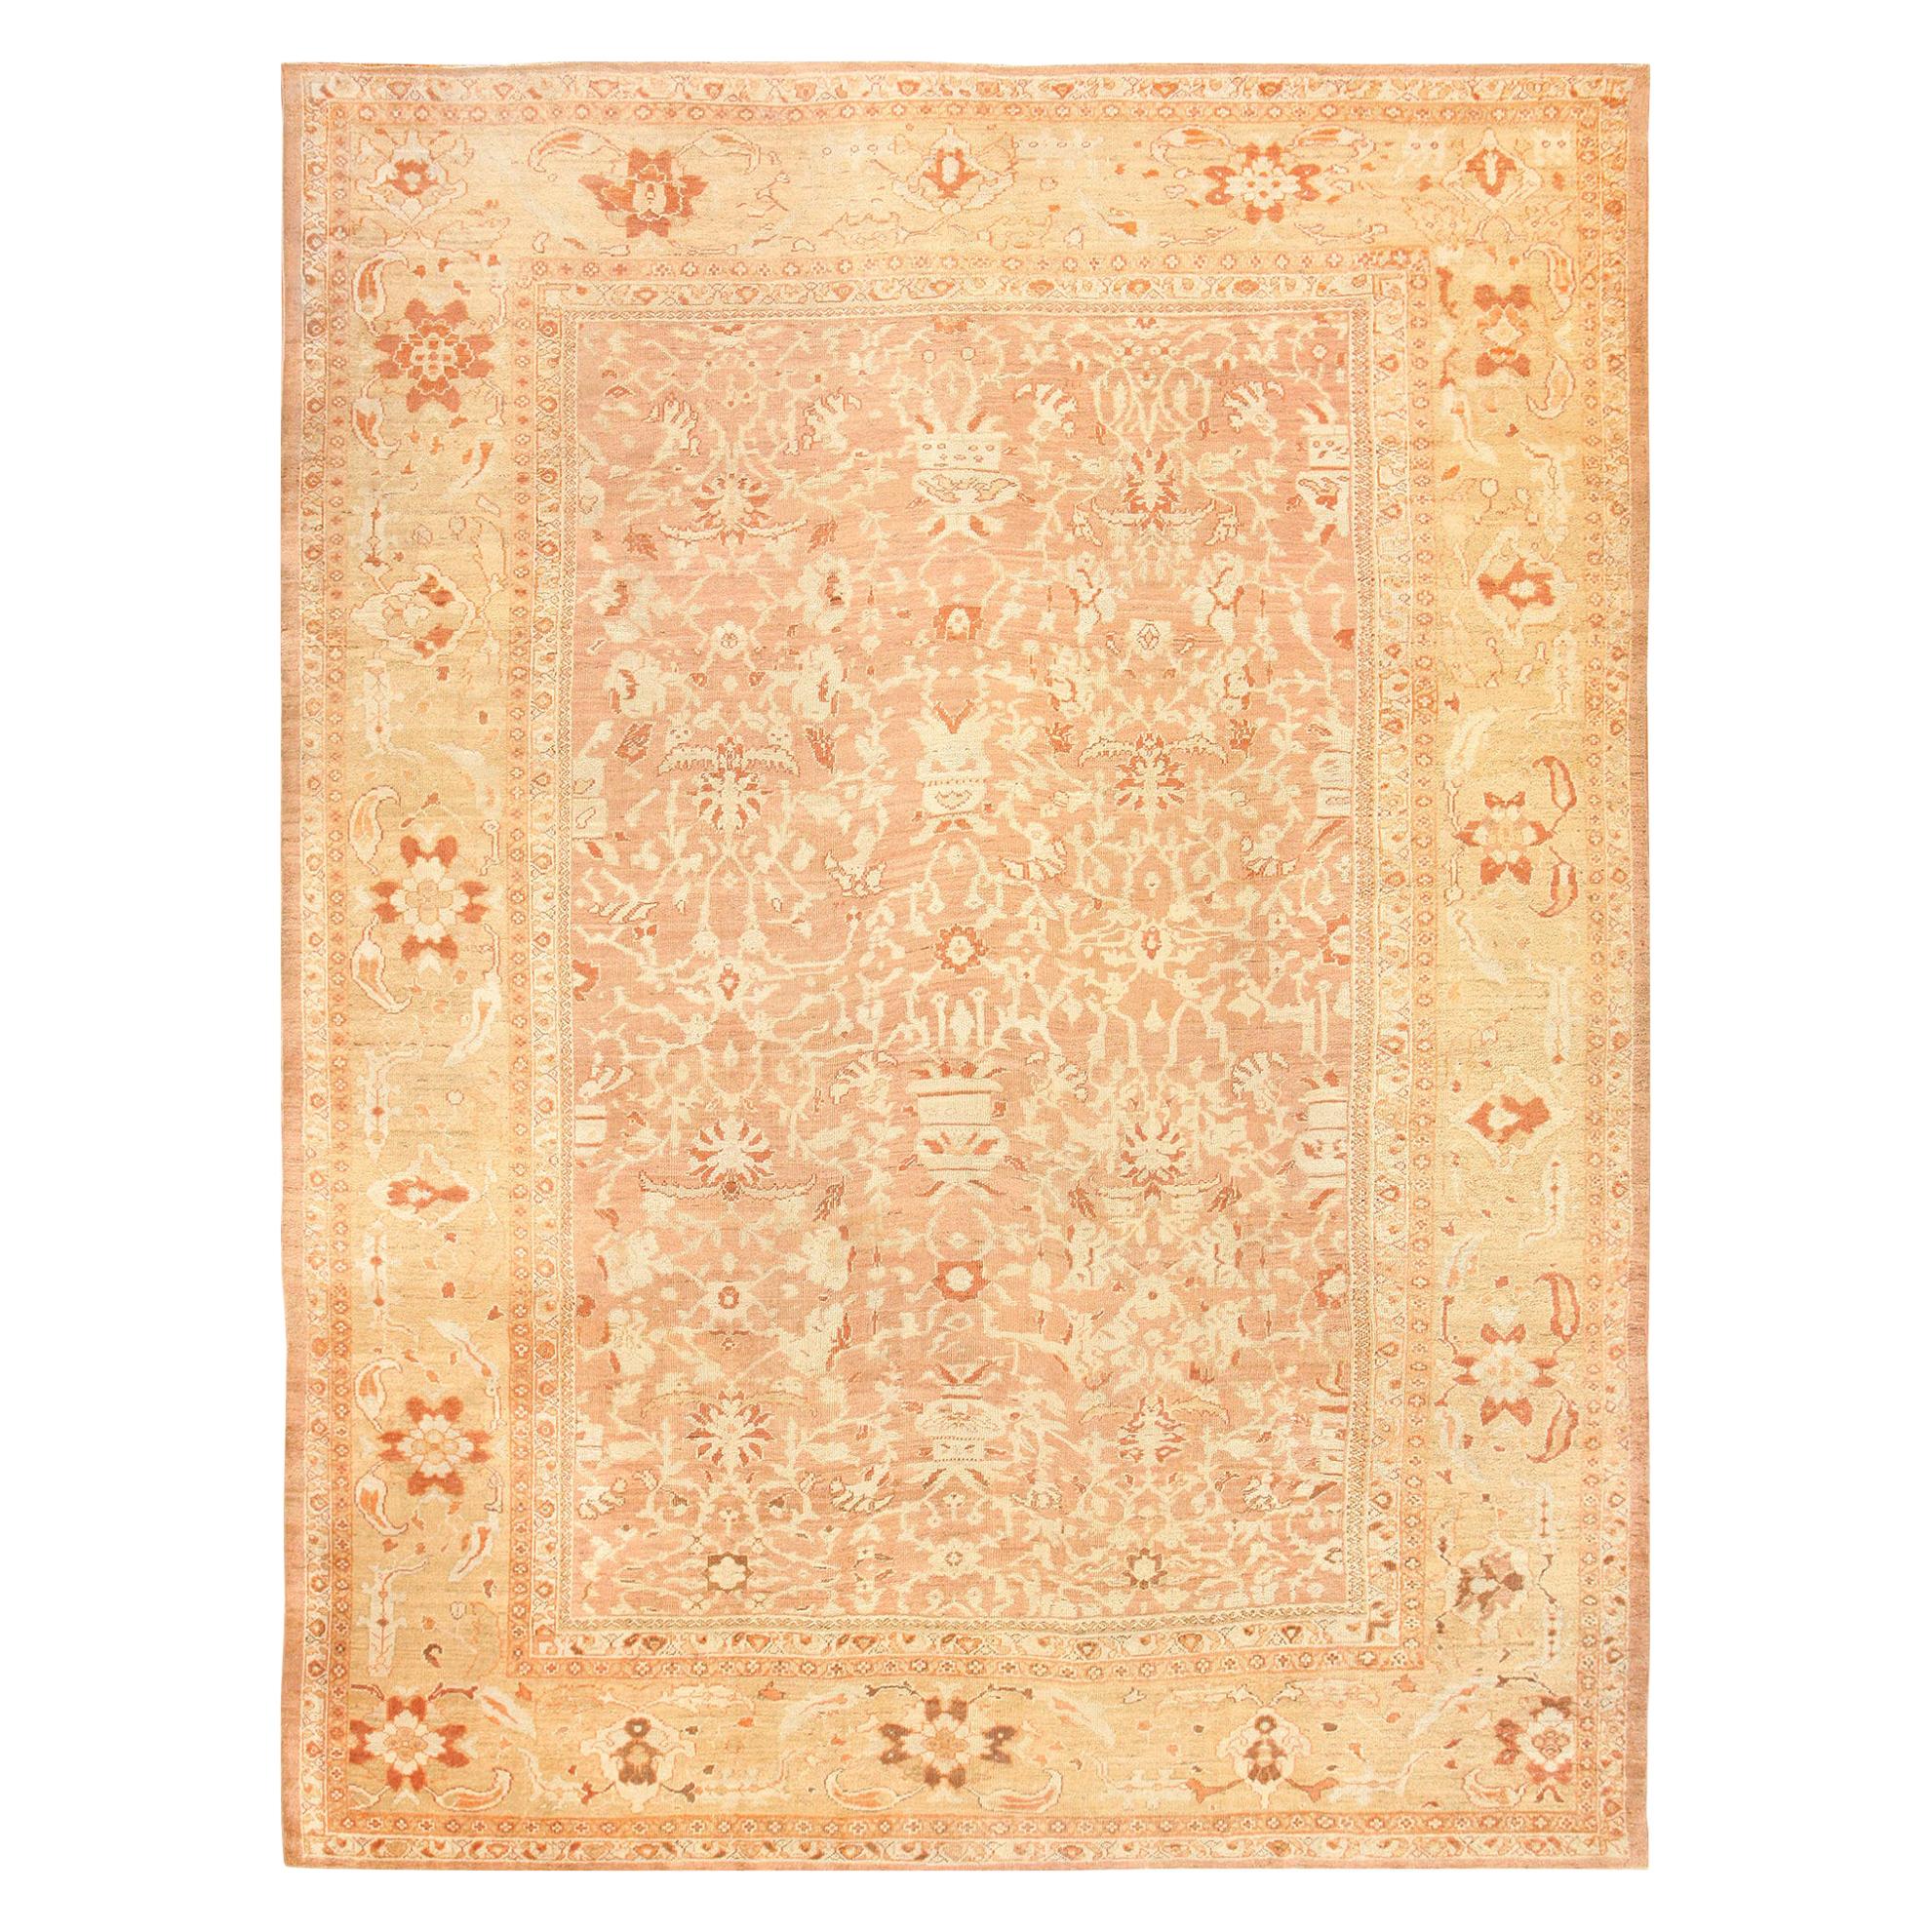 Decorative Antique Persian Ziegler Sultanabad Rug. Size: 11 ft x 15 ft